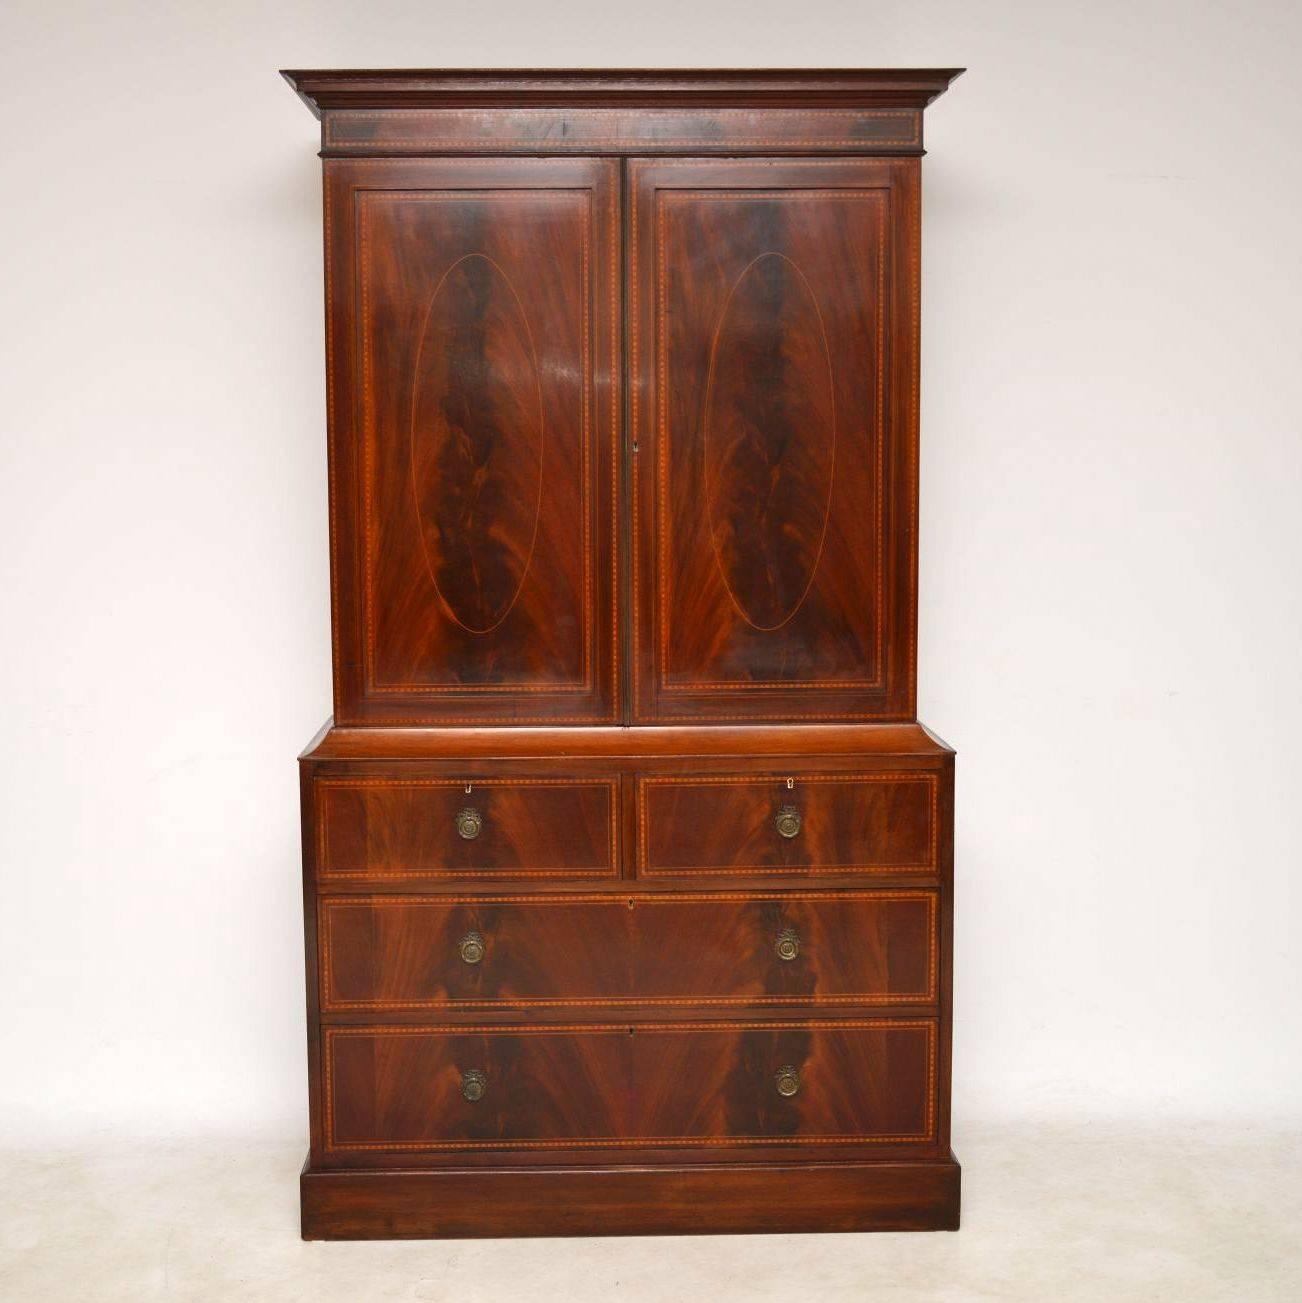 This antique linen press is extremely fine quality and in good original condition. Dating from the 1890s period, it has many fine features. The satinwood inlays are all over the front, which is also flame mahogany. There's a brass beading between